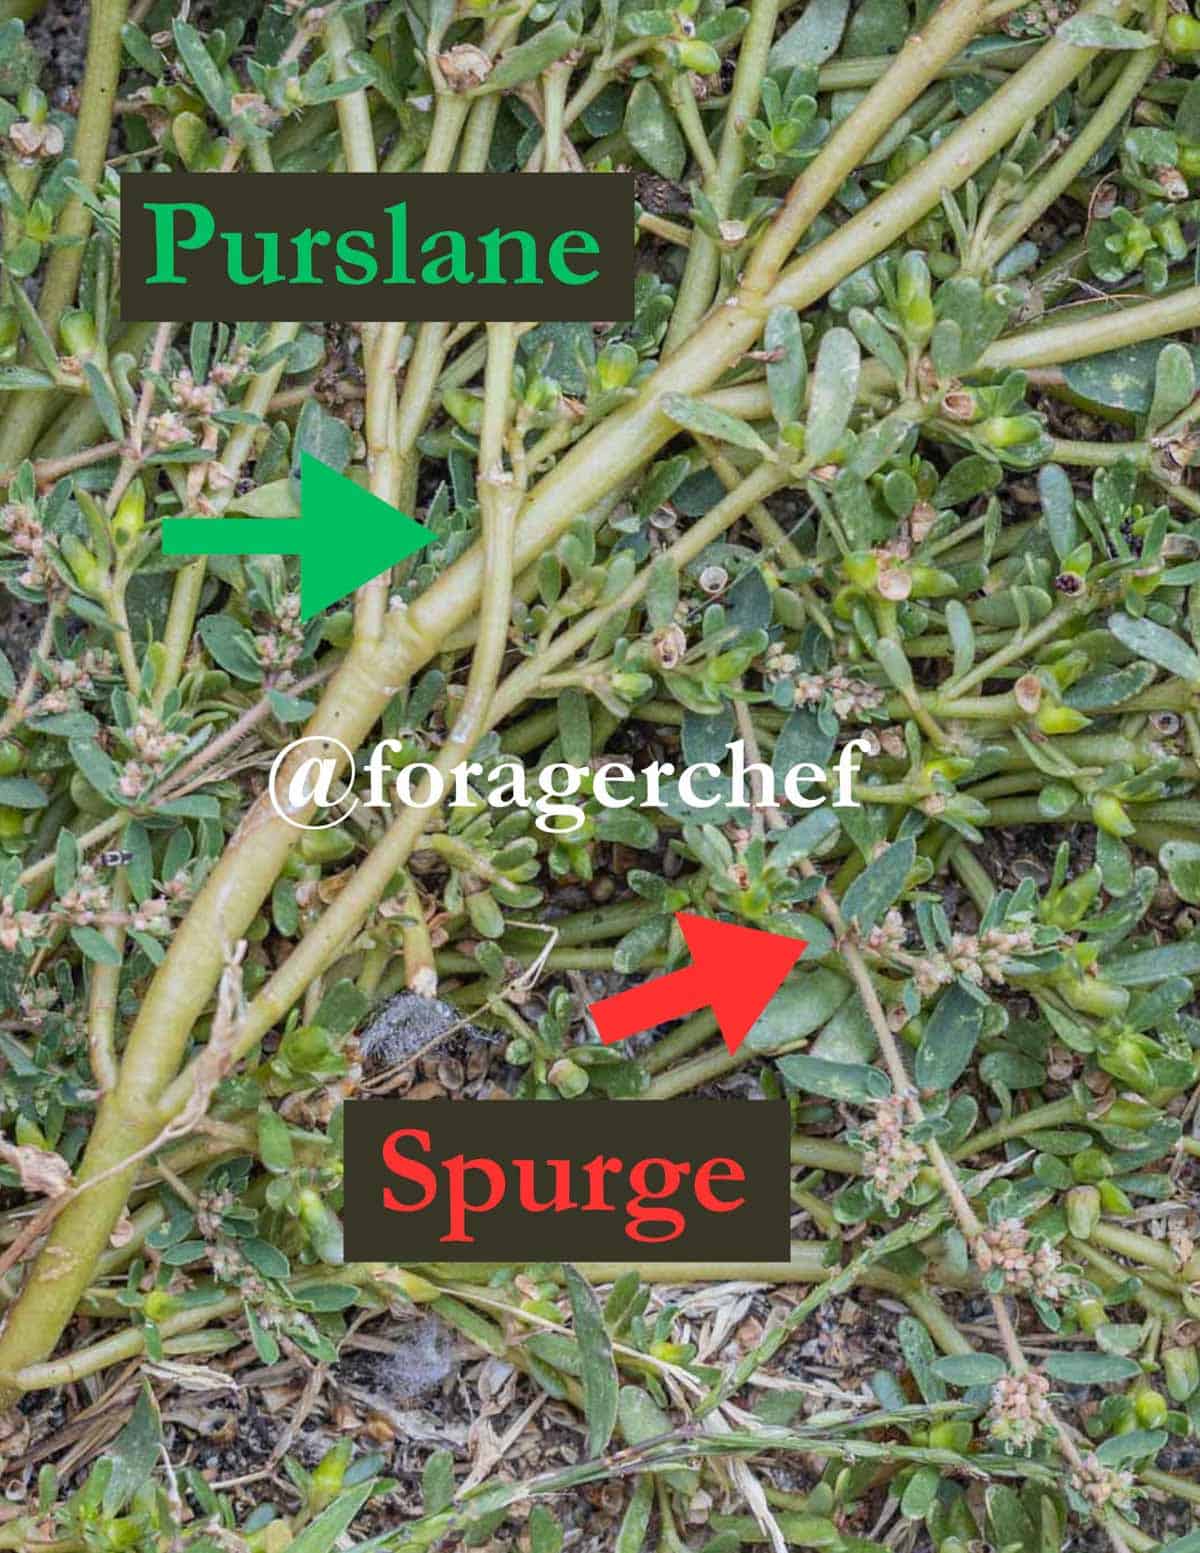 A close up image and infographic showing the differences between common purslane and its look alike spotted spurge. 